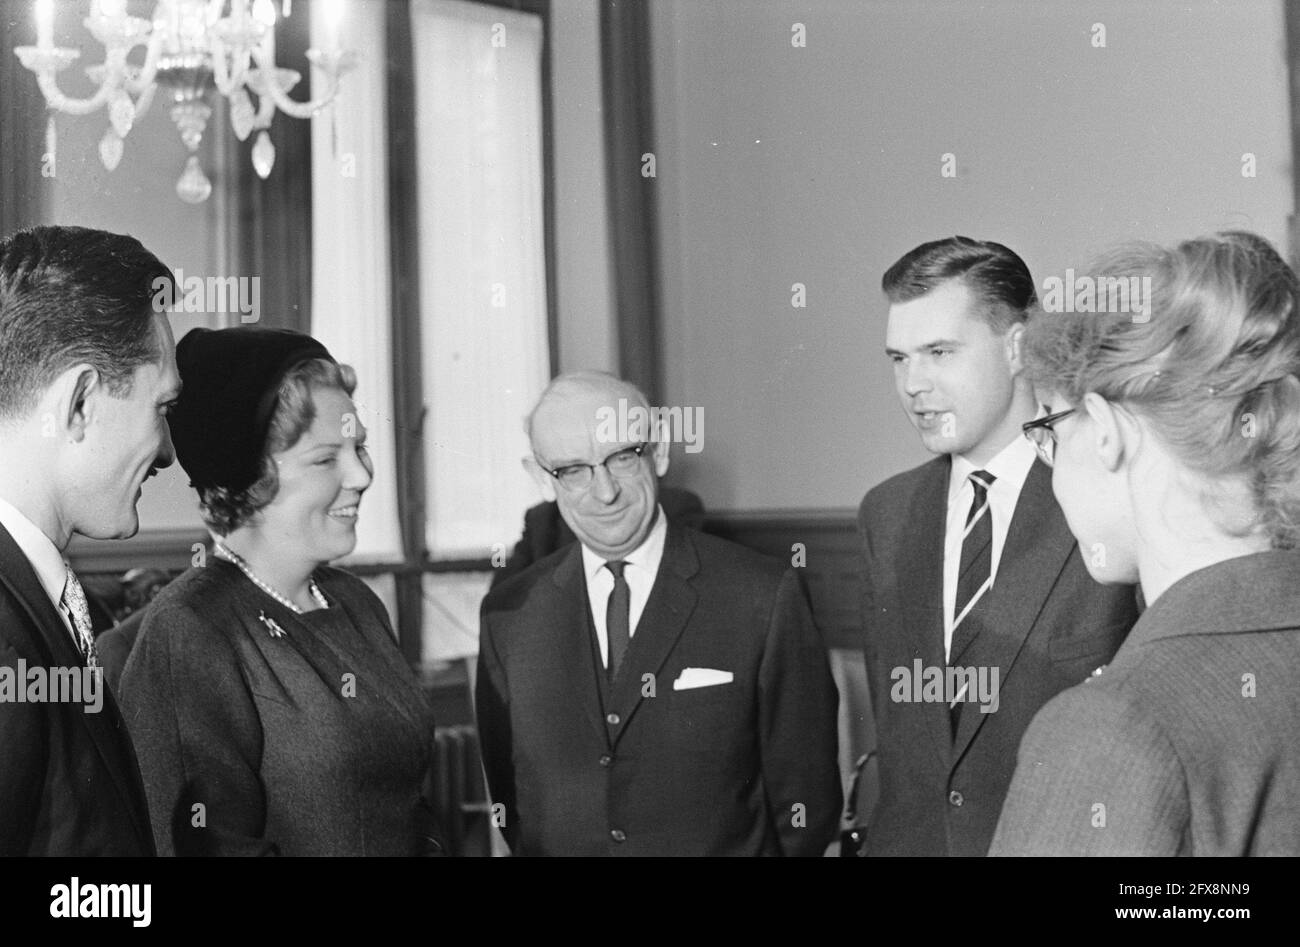 Princess Beatrix patroness inventory Asylum Fund at Reich C. Utrecht speaks to refugees, November 18, 1961, FLIGHTS, patronesses, The Netherlands, 20th century press agency photo, news to remember, documentary, historic photography 1945-1990, visual stories, human history of the Twentieth Century, capturing moments in time Stock Photo